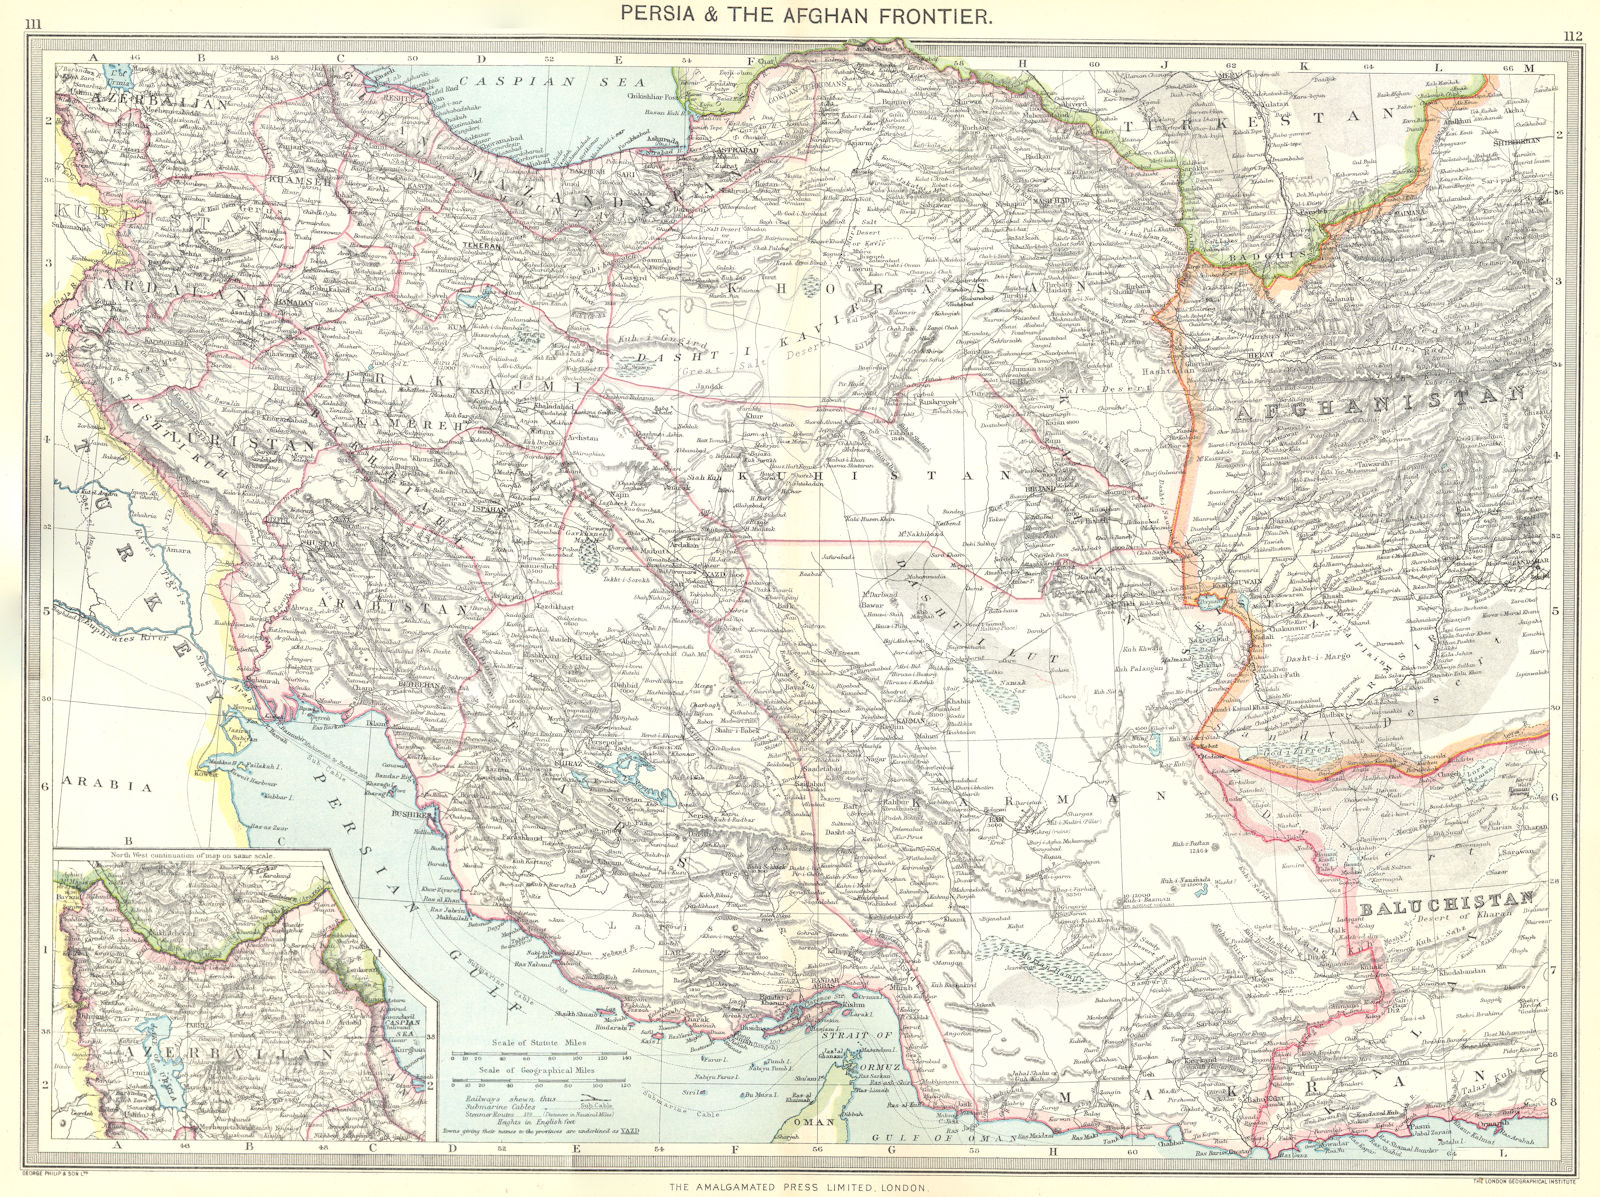 Associate Product IRAN. Iran and the Afghan Frontier; Inset map of Azerbaijan 1907 old